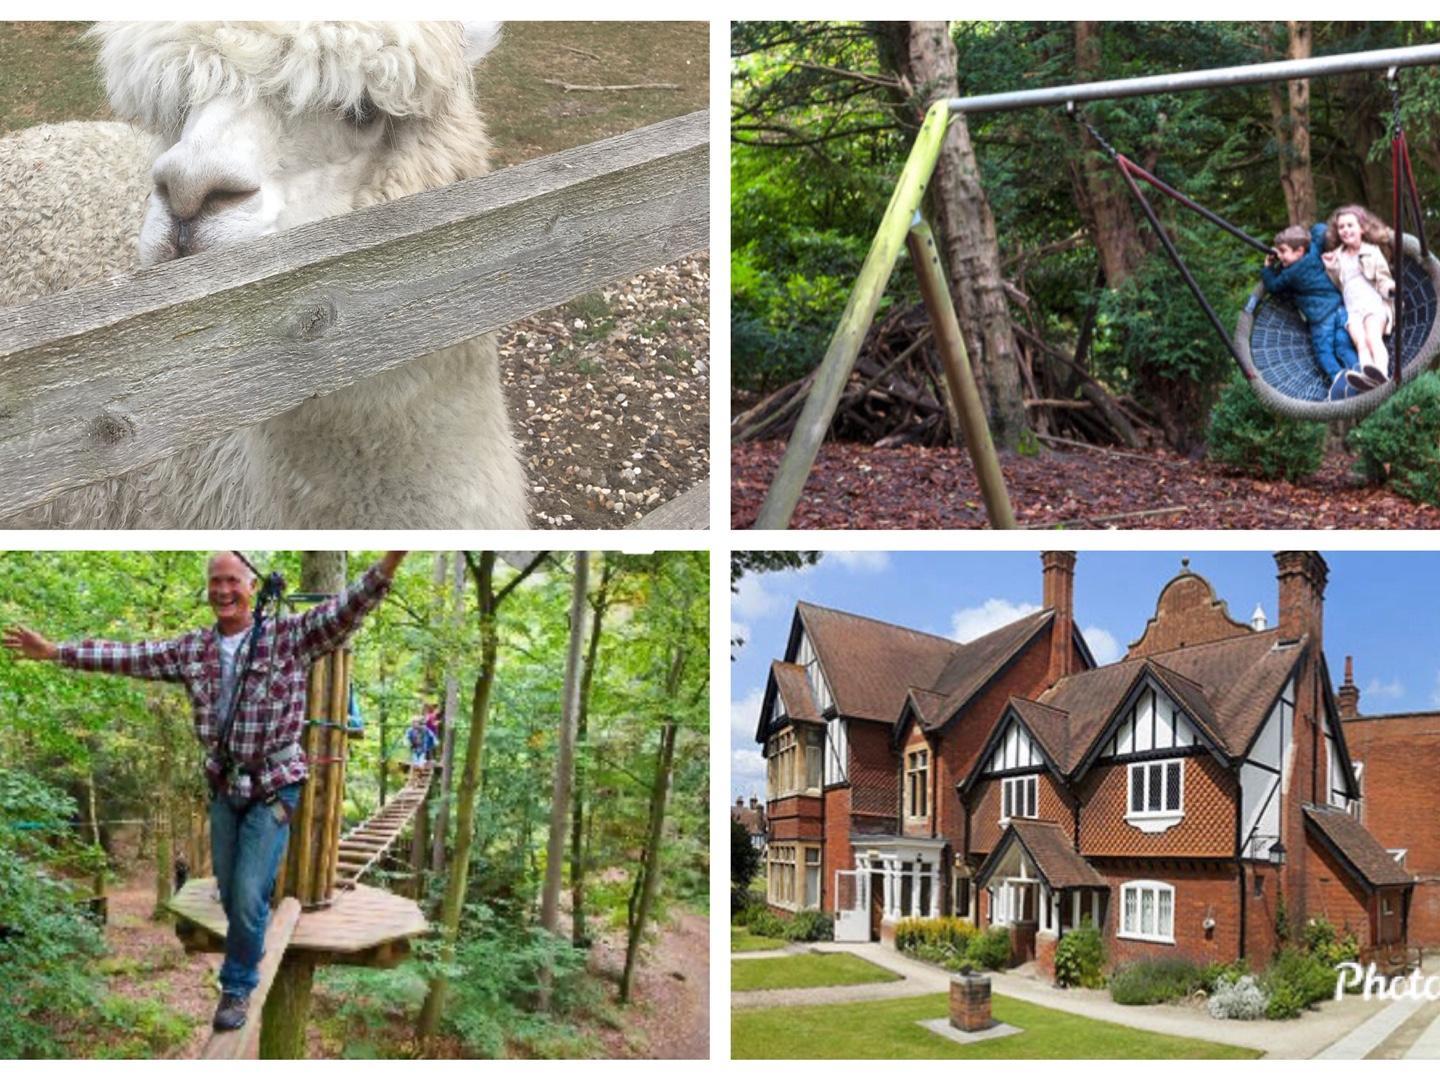 Great days out in Aylesbury Vale and beyond